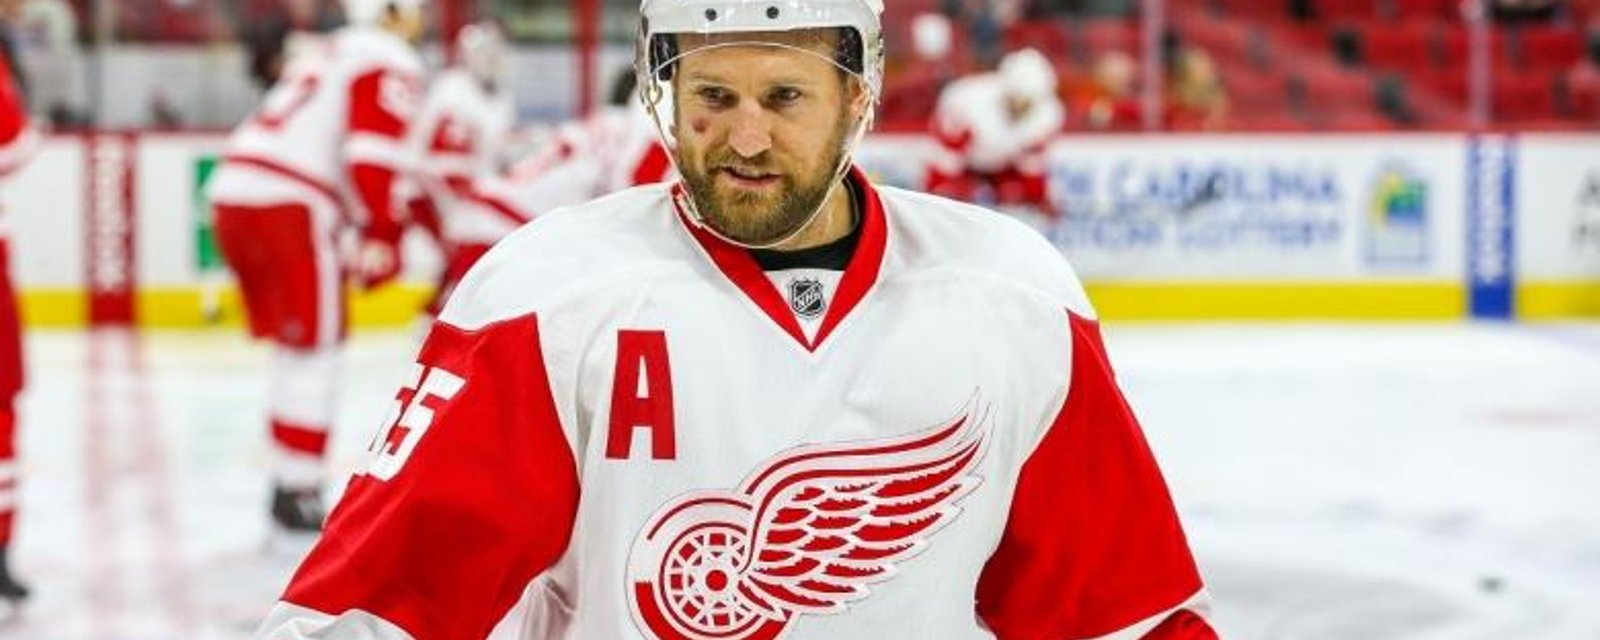 A promising sign for Niklas Kronwall.